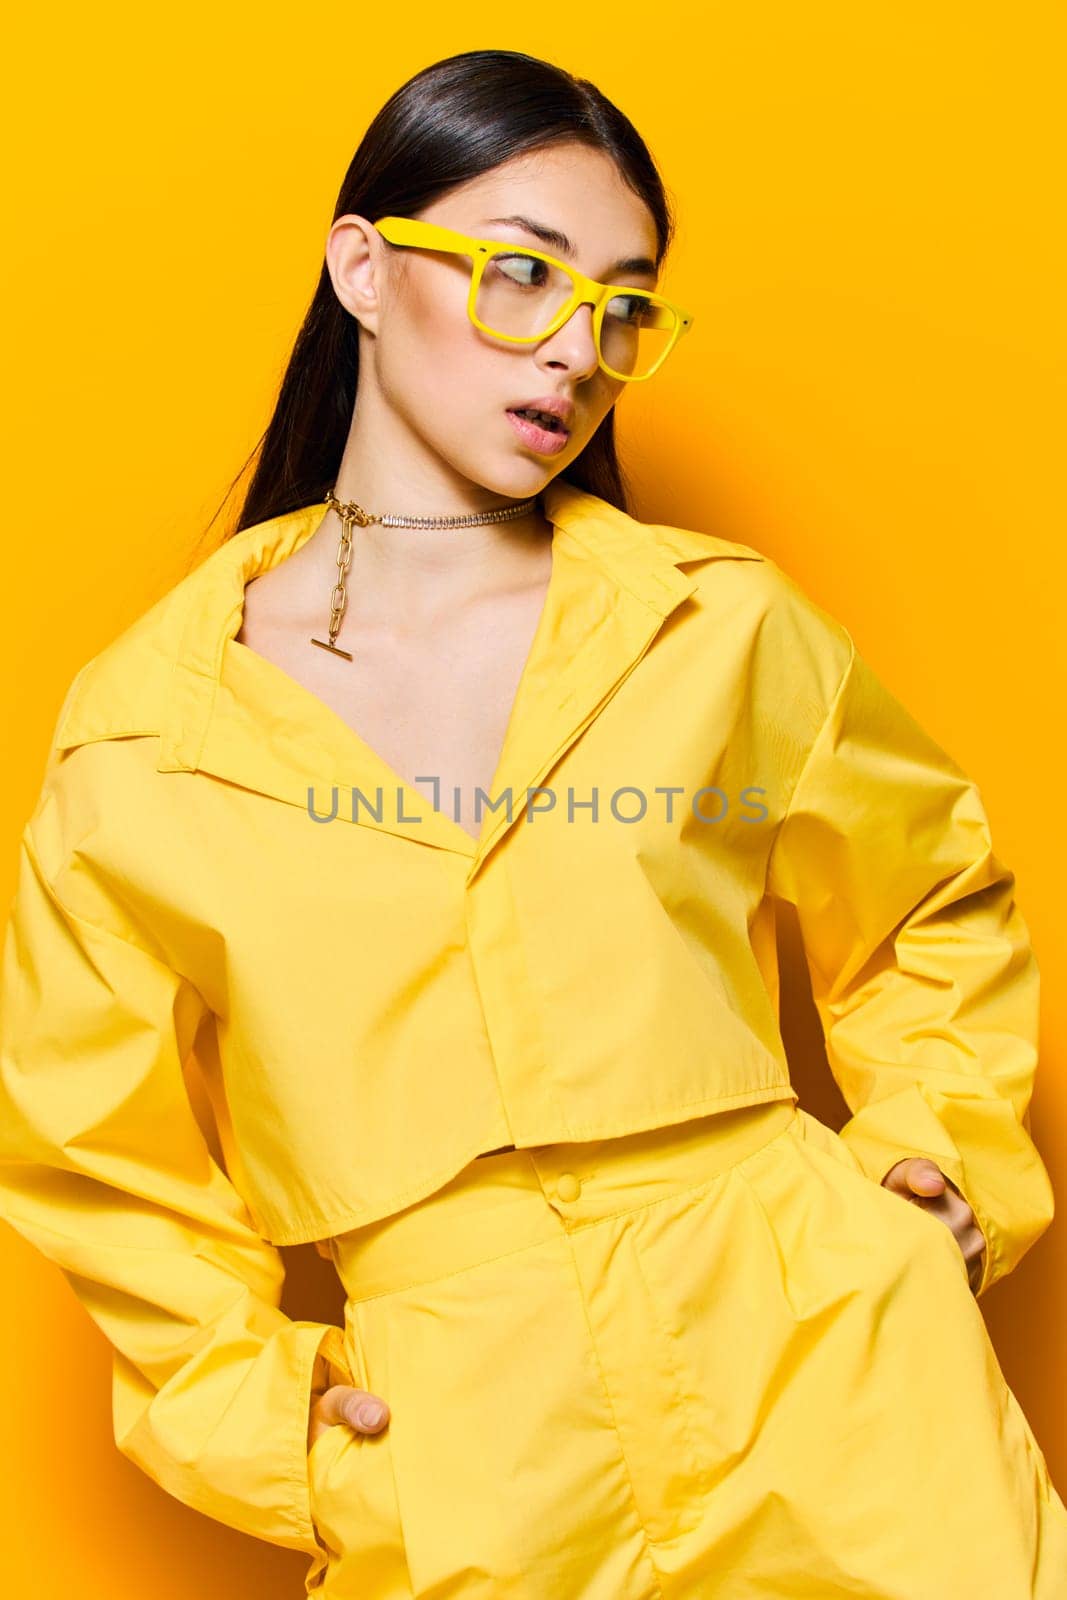 monochrome woman style hair gesture yellow lady model girl lifestyle happy attractive trendy glamour positive beautiful glasses long fashion young expression outfit